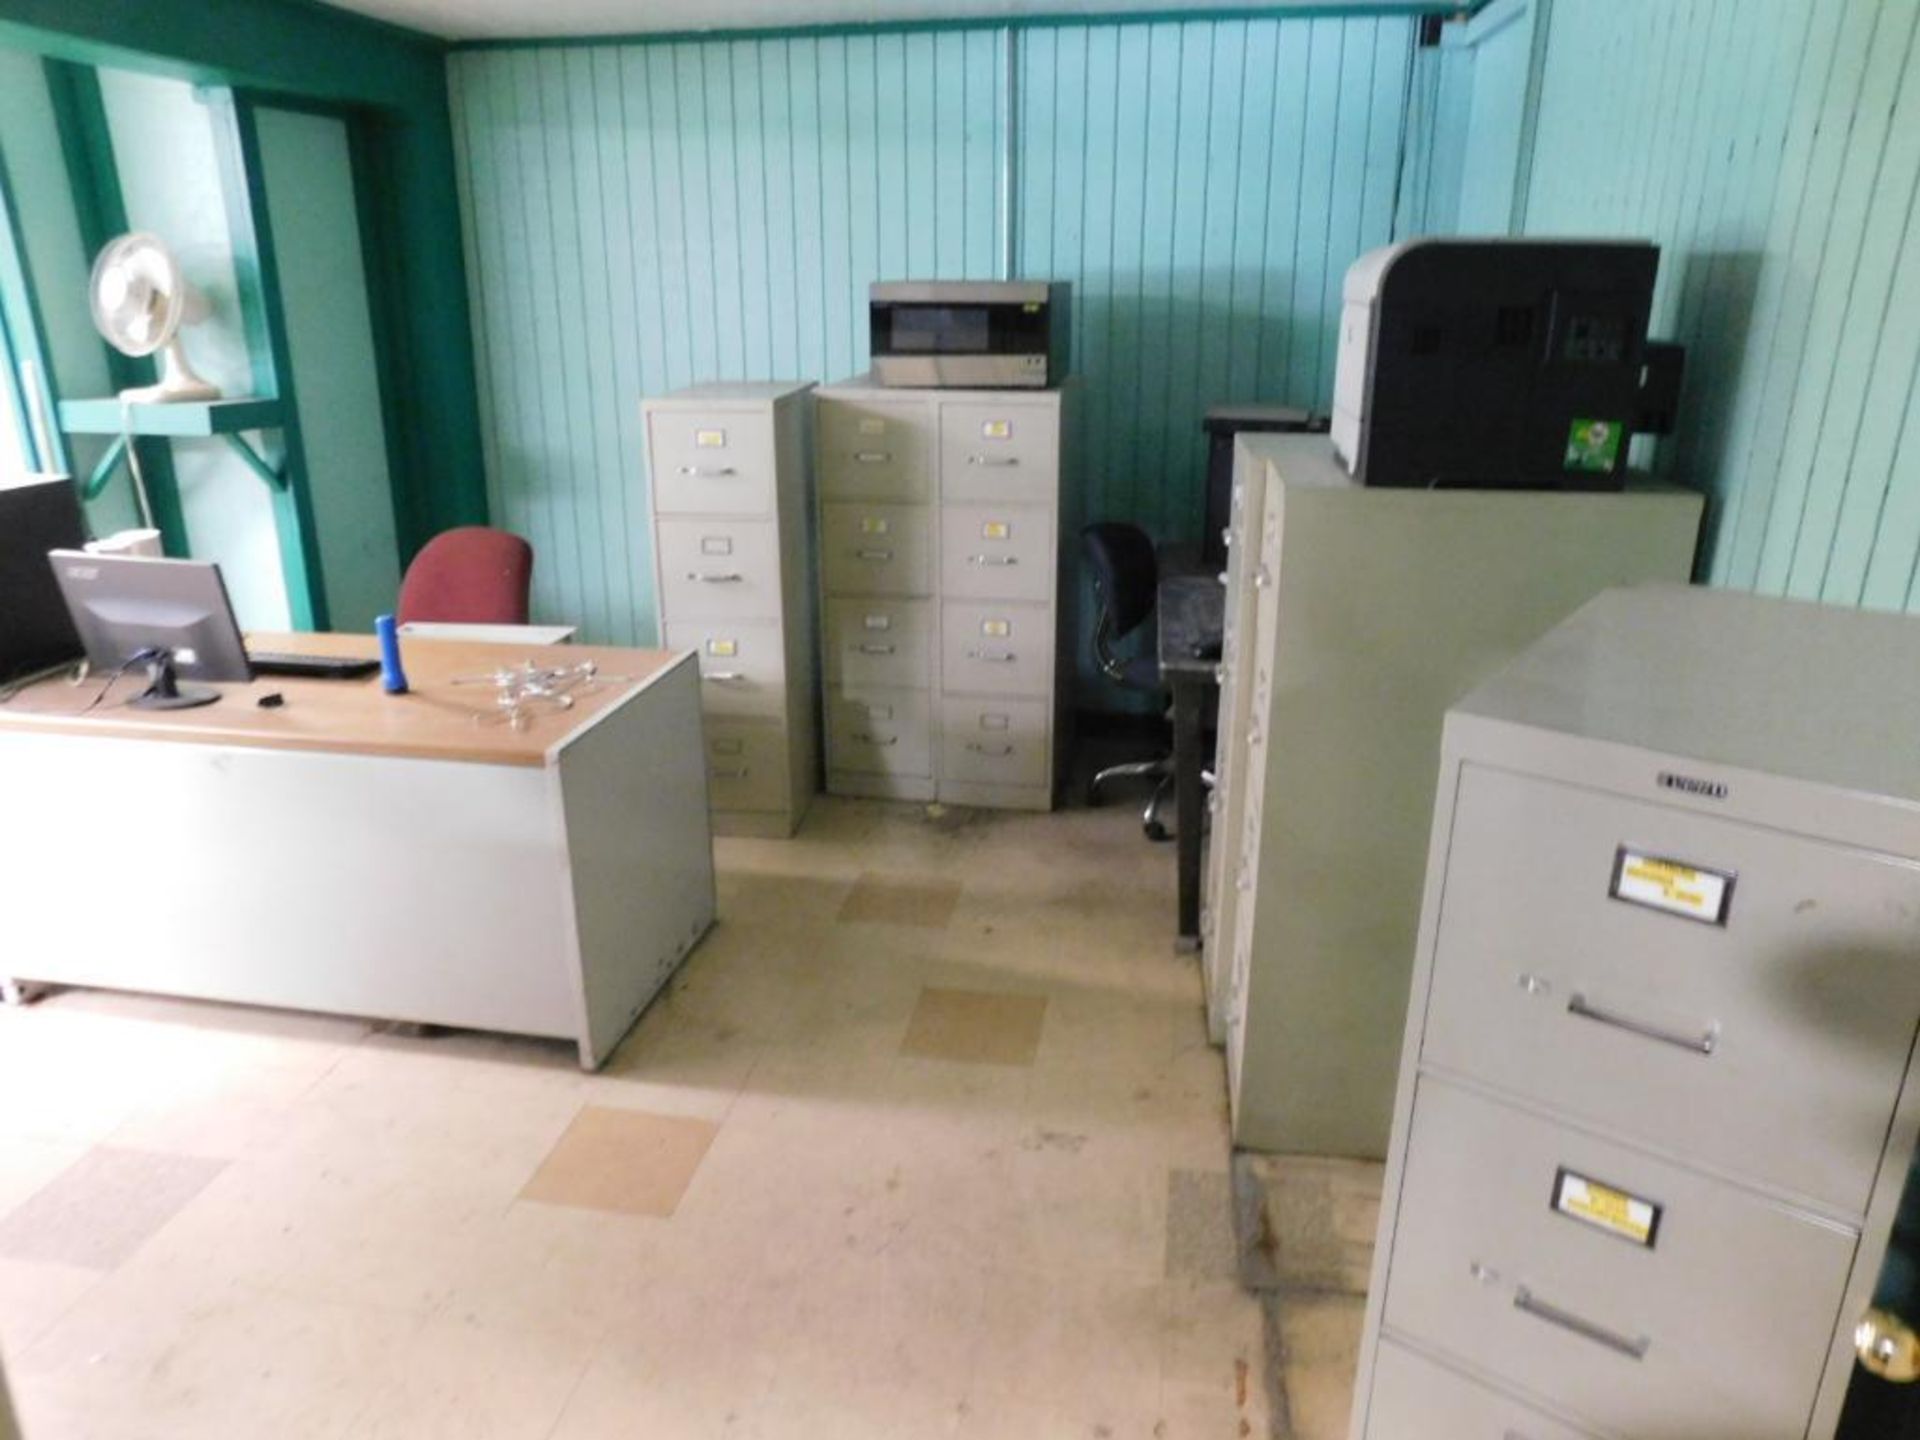 LOT: Contents of Offices: Desks, Chairs, File Cabinets, Monitors (NO TOWERS OR PRINTERS) - Image 2 of 11